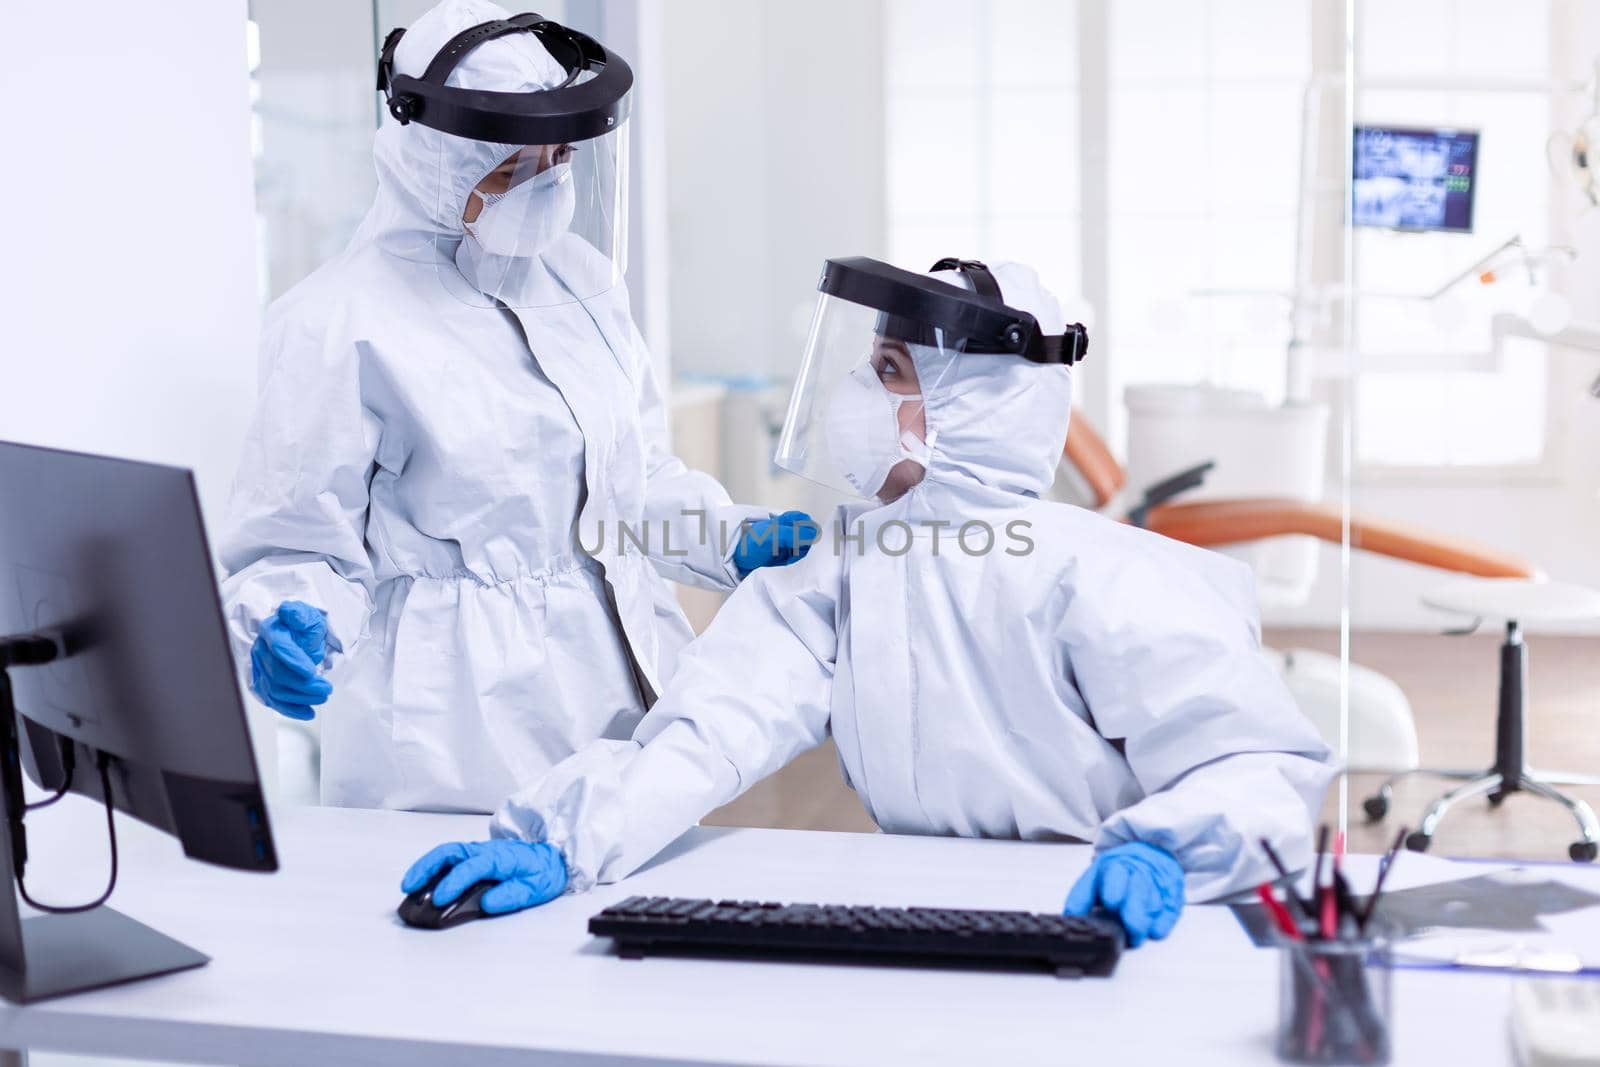 Women doctors in protective suit to fight pandemic with covid-19 in dental reception. Medicine team wearing protection gear against coronavirus pandemic in dental reception as safety precaution.